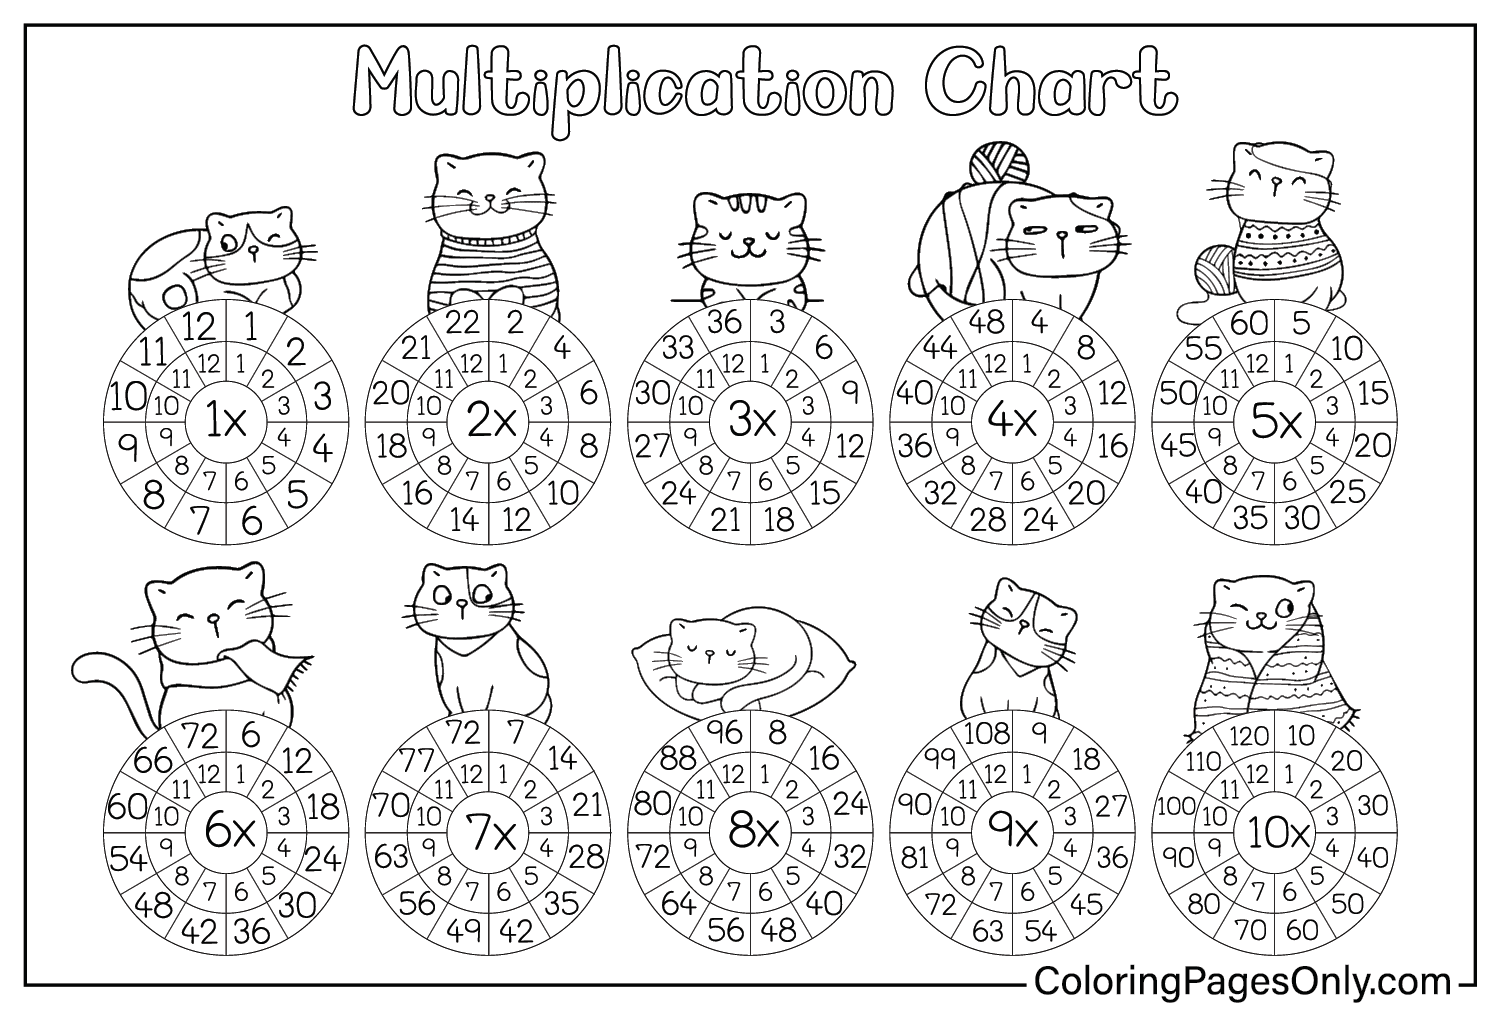 Coloring Page Multiplication Chart from Multiplication Chart